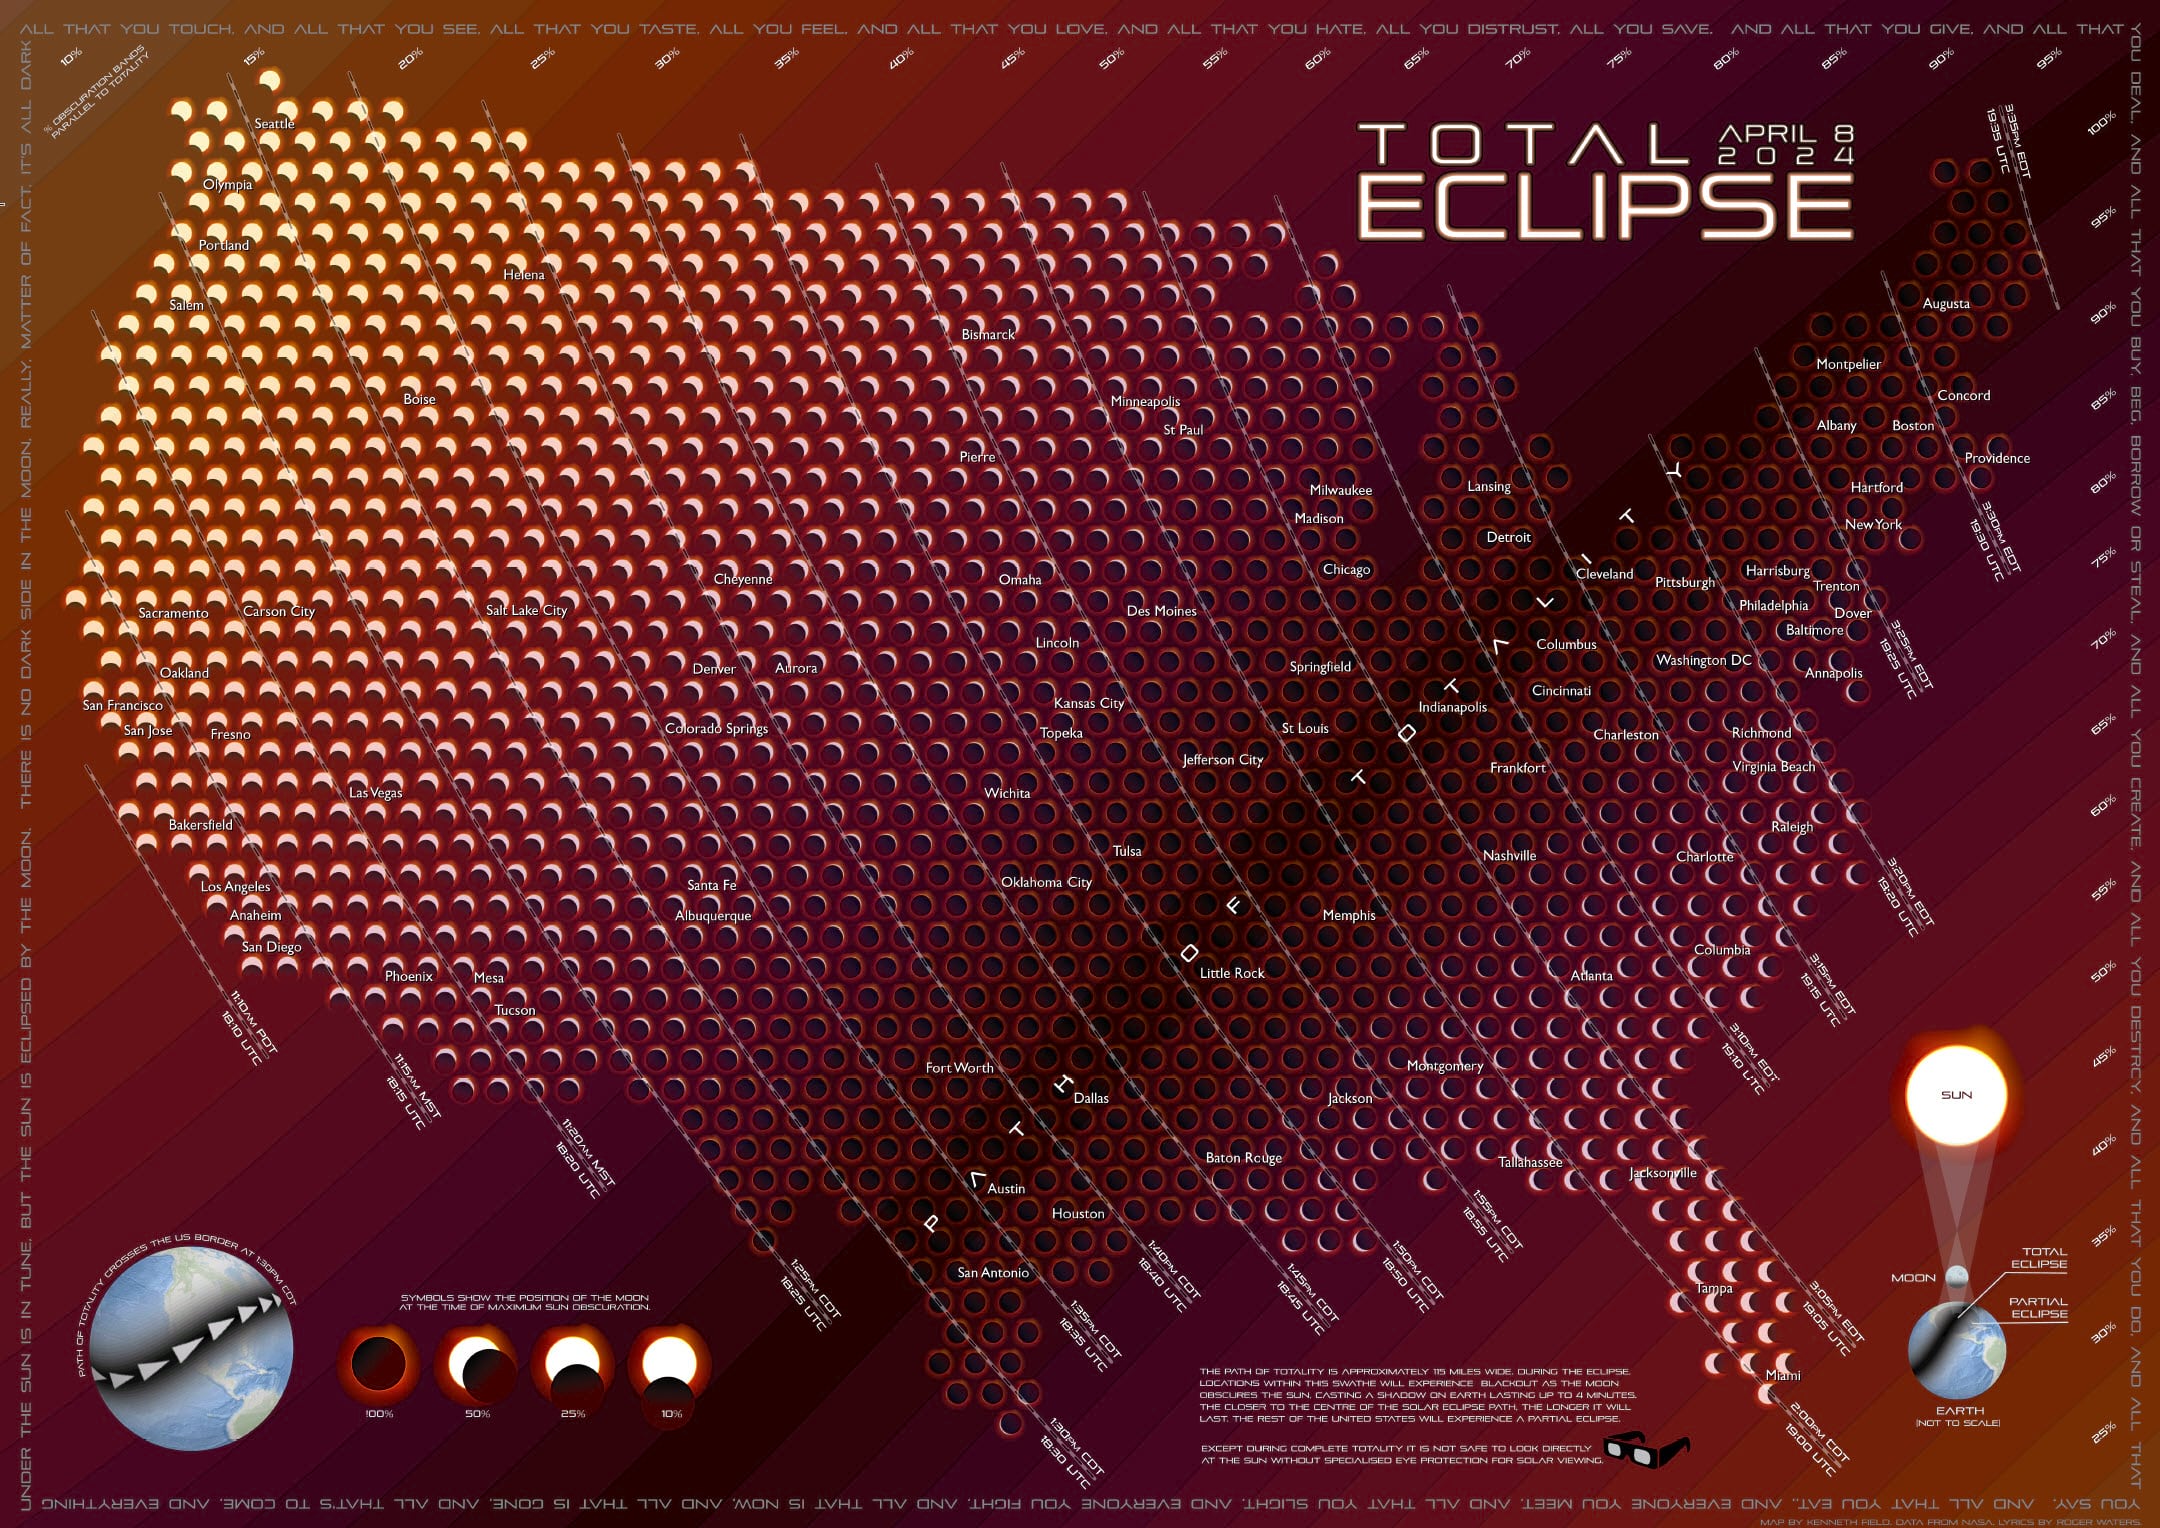 A first draft of the eclipse map